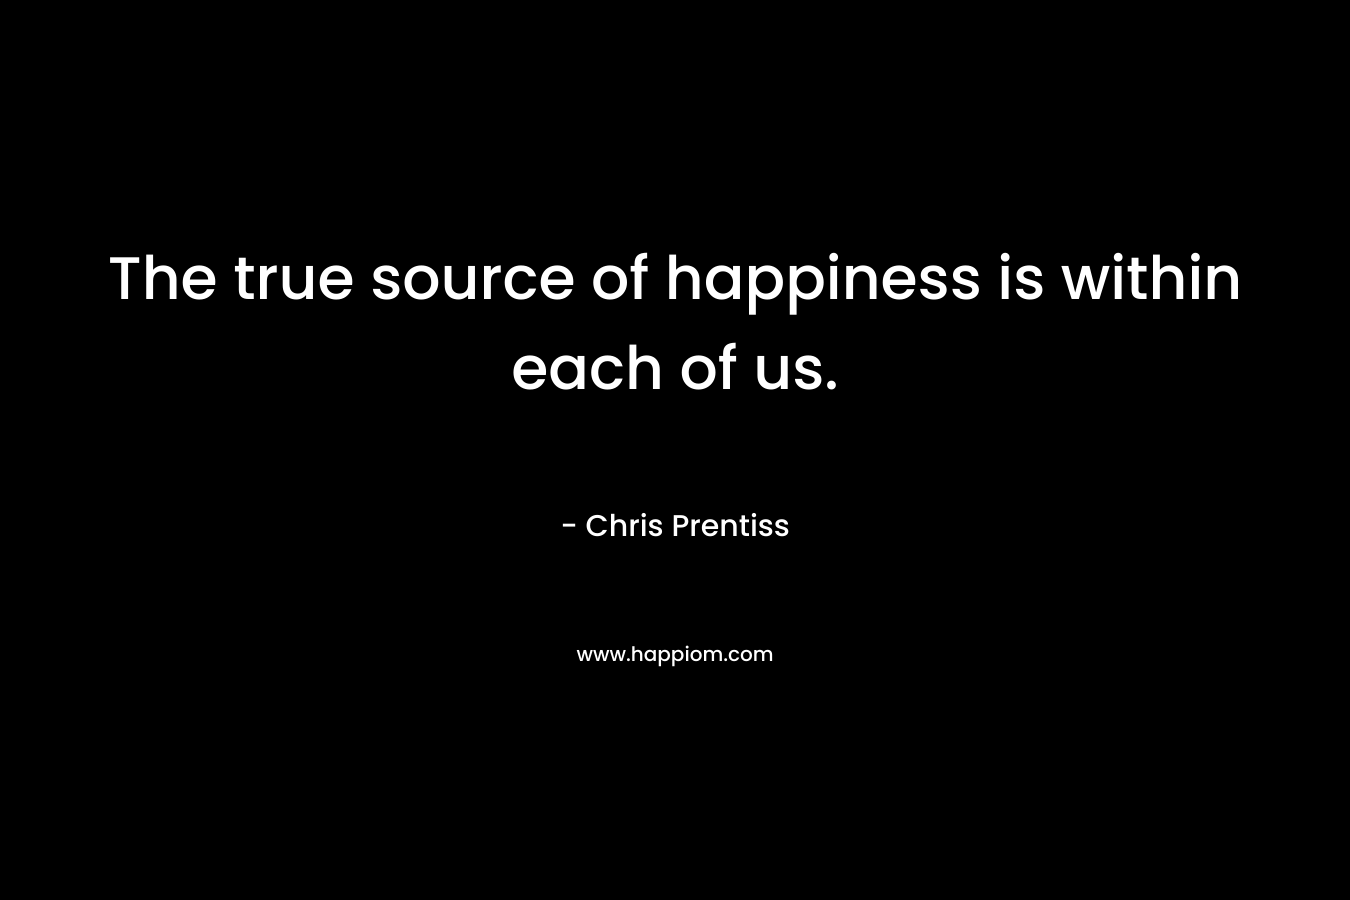 The true source of happiness is within each of us. – Chris Prentiss